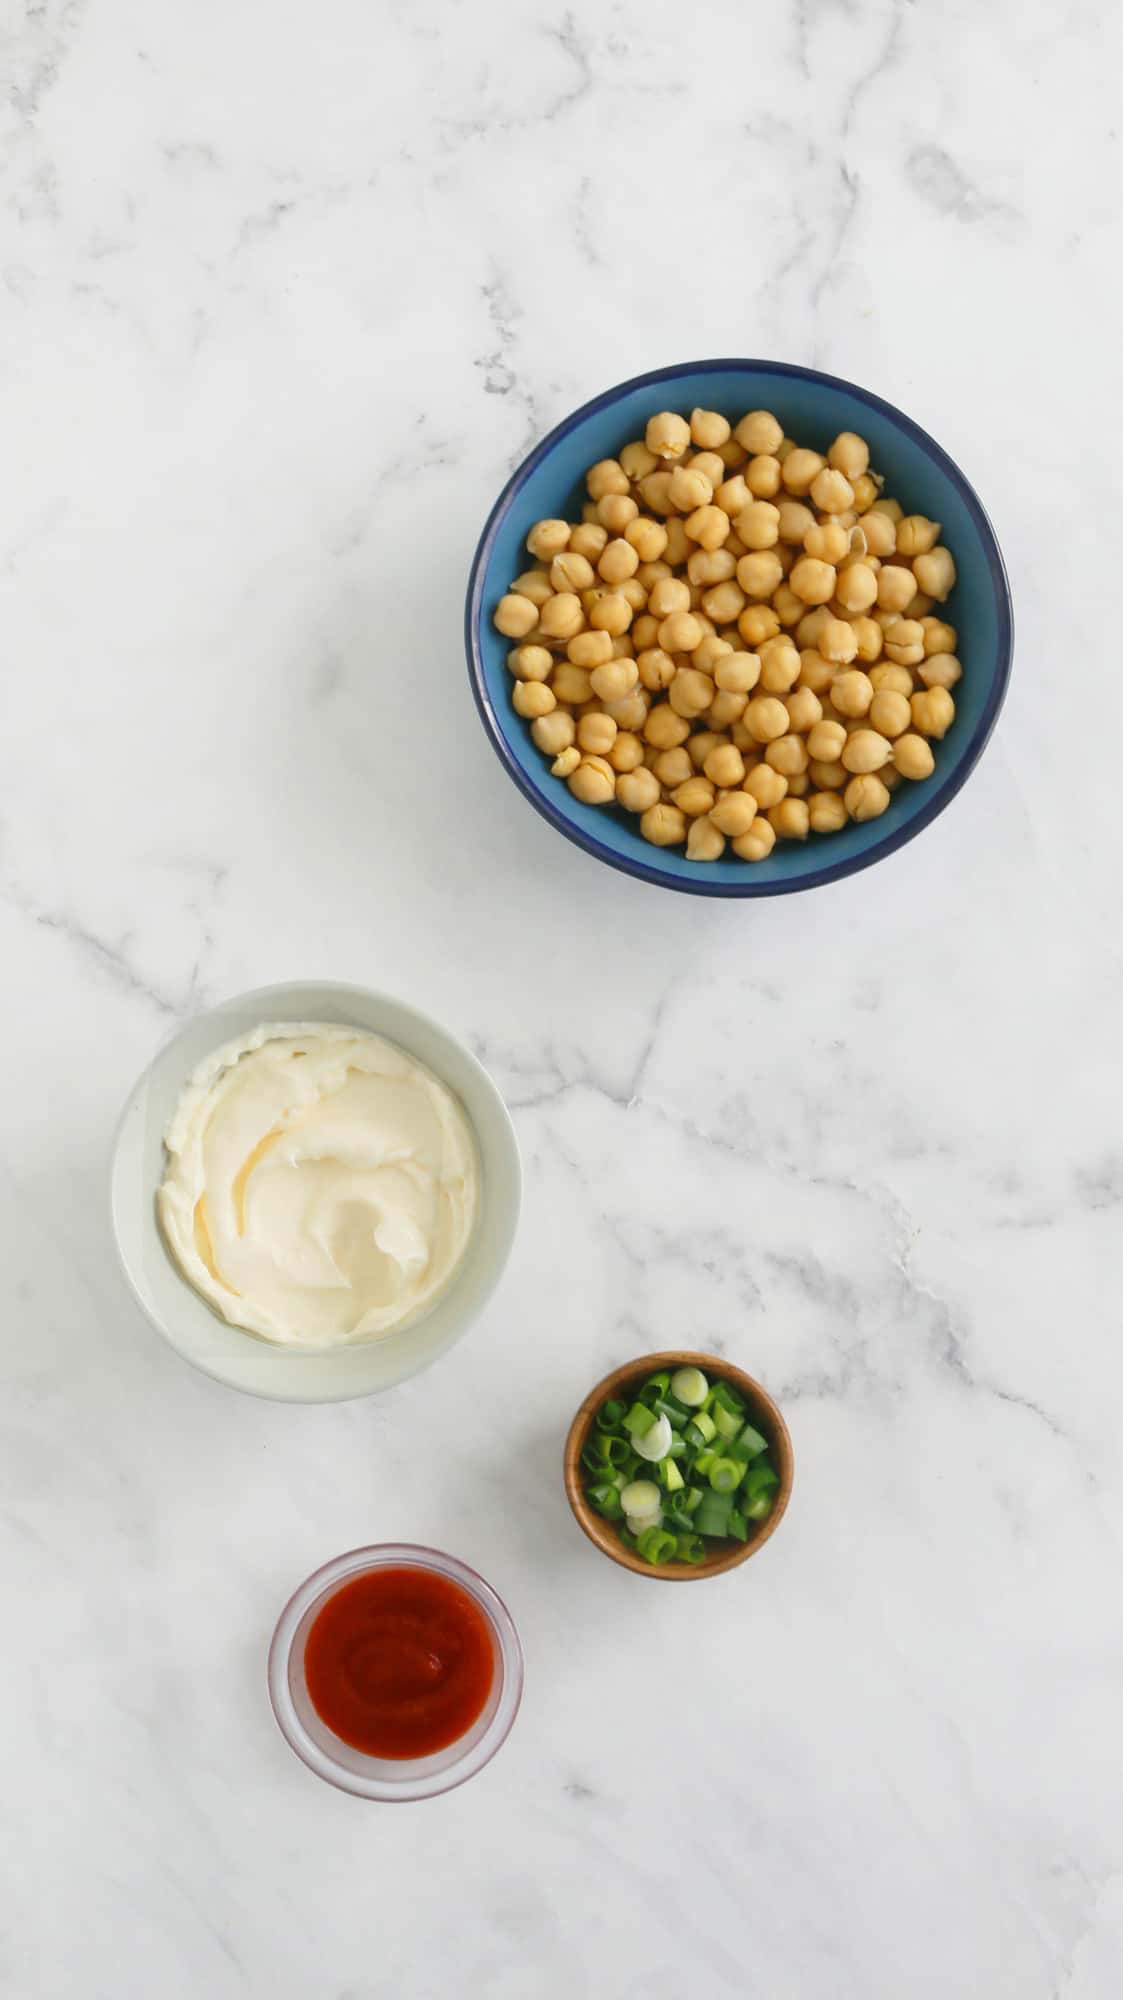 ingredients to make chickpea salad